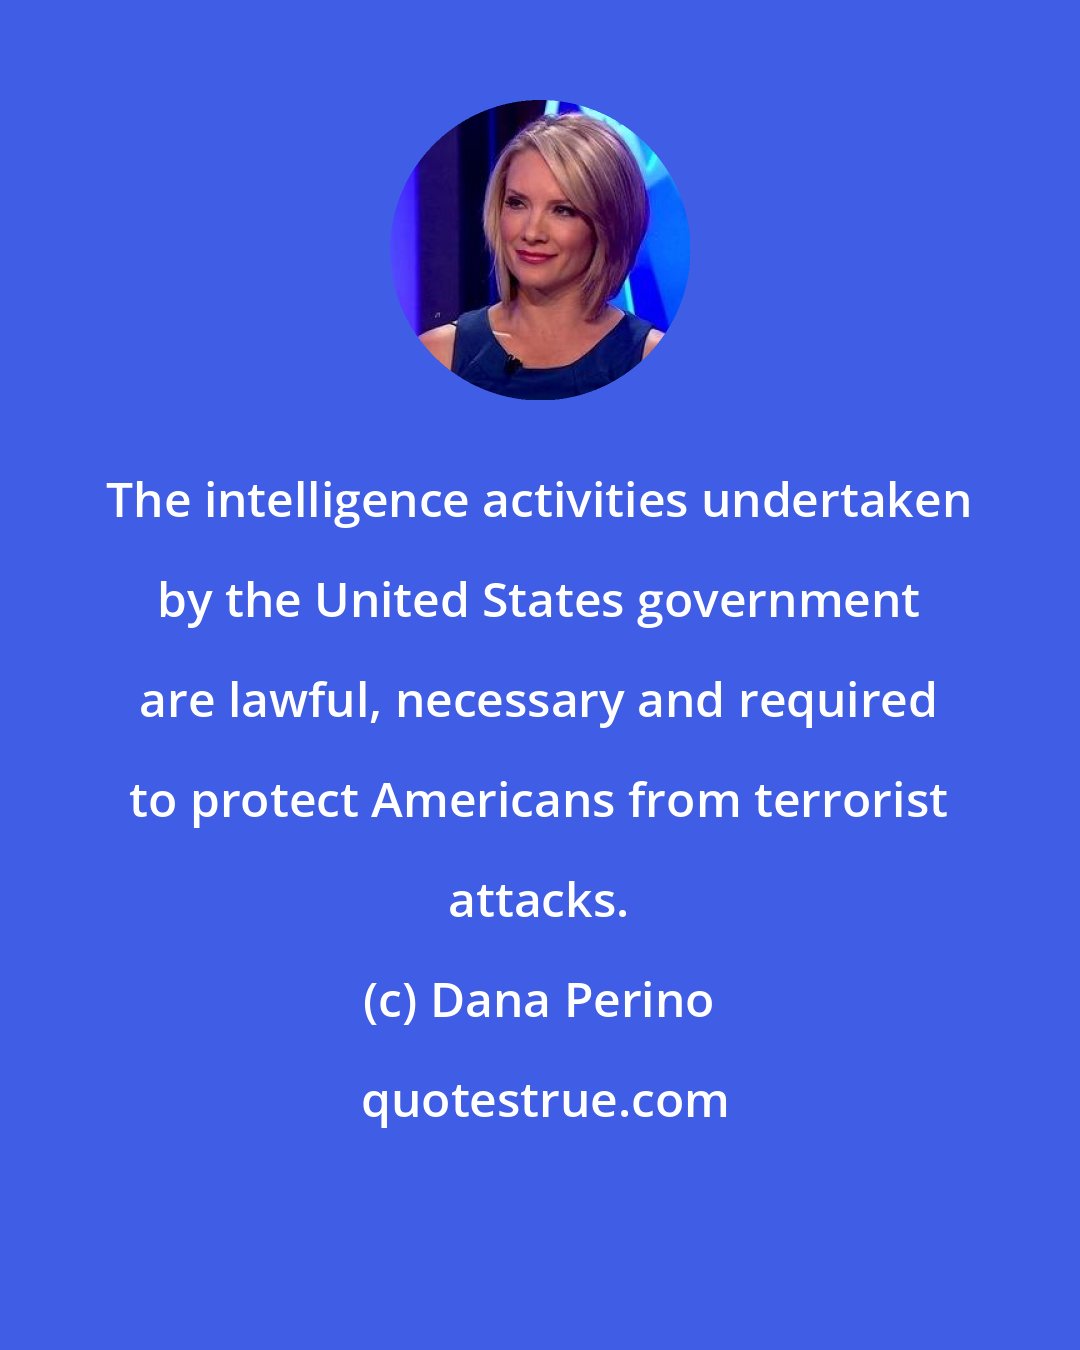 Dana Perino: The intelligence activities undertaken by the United States government are lawful, necessary and required to protect Americans from terrorist attacks.